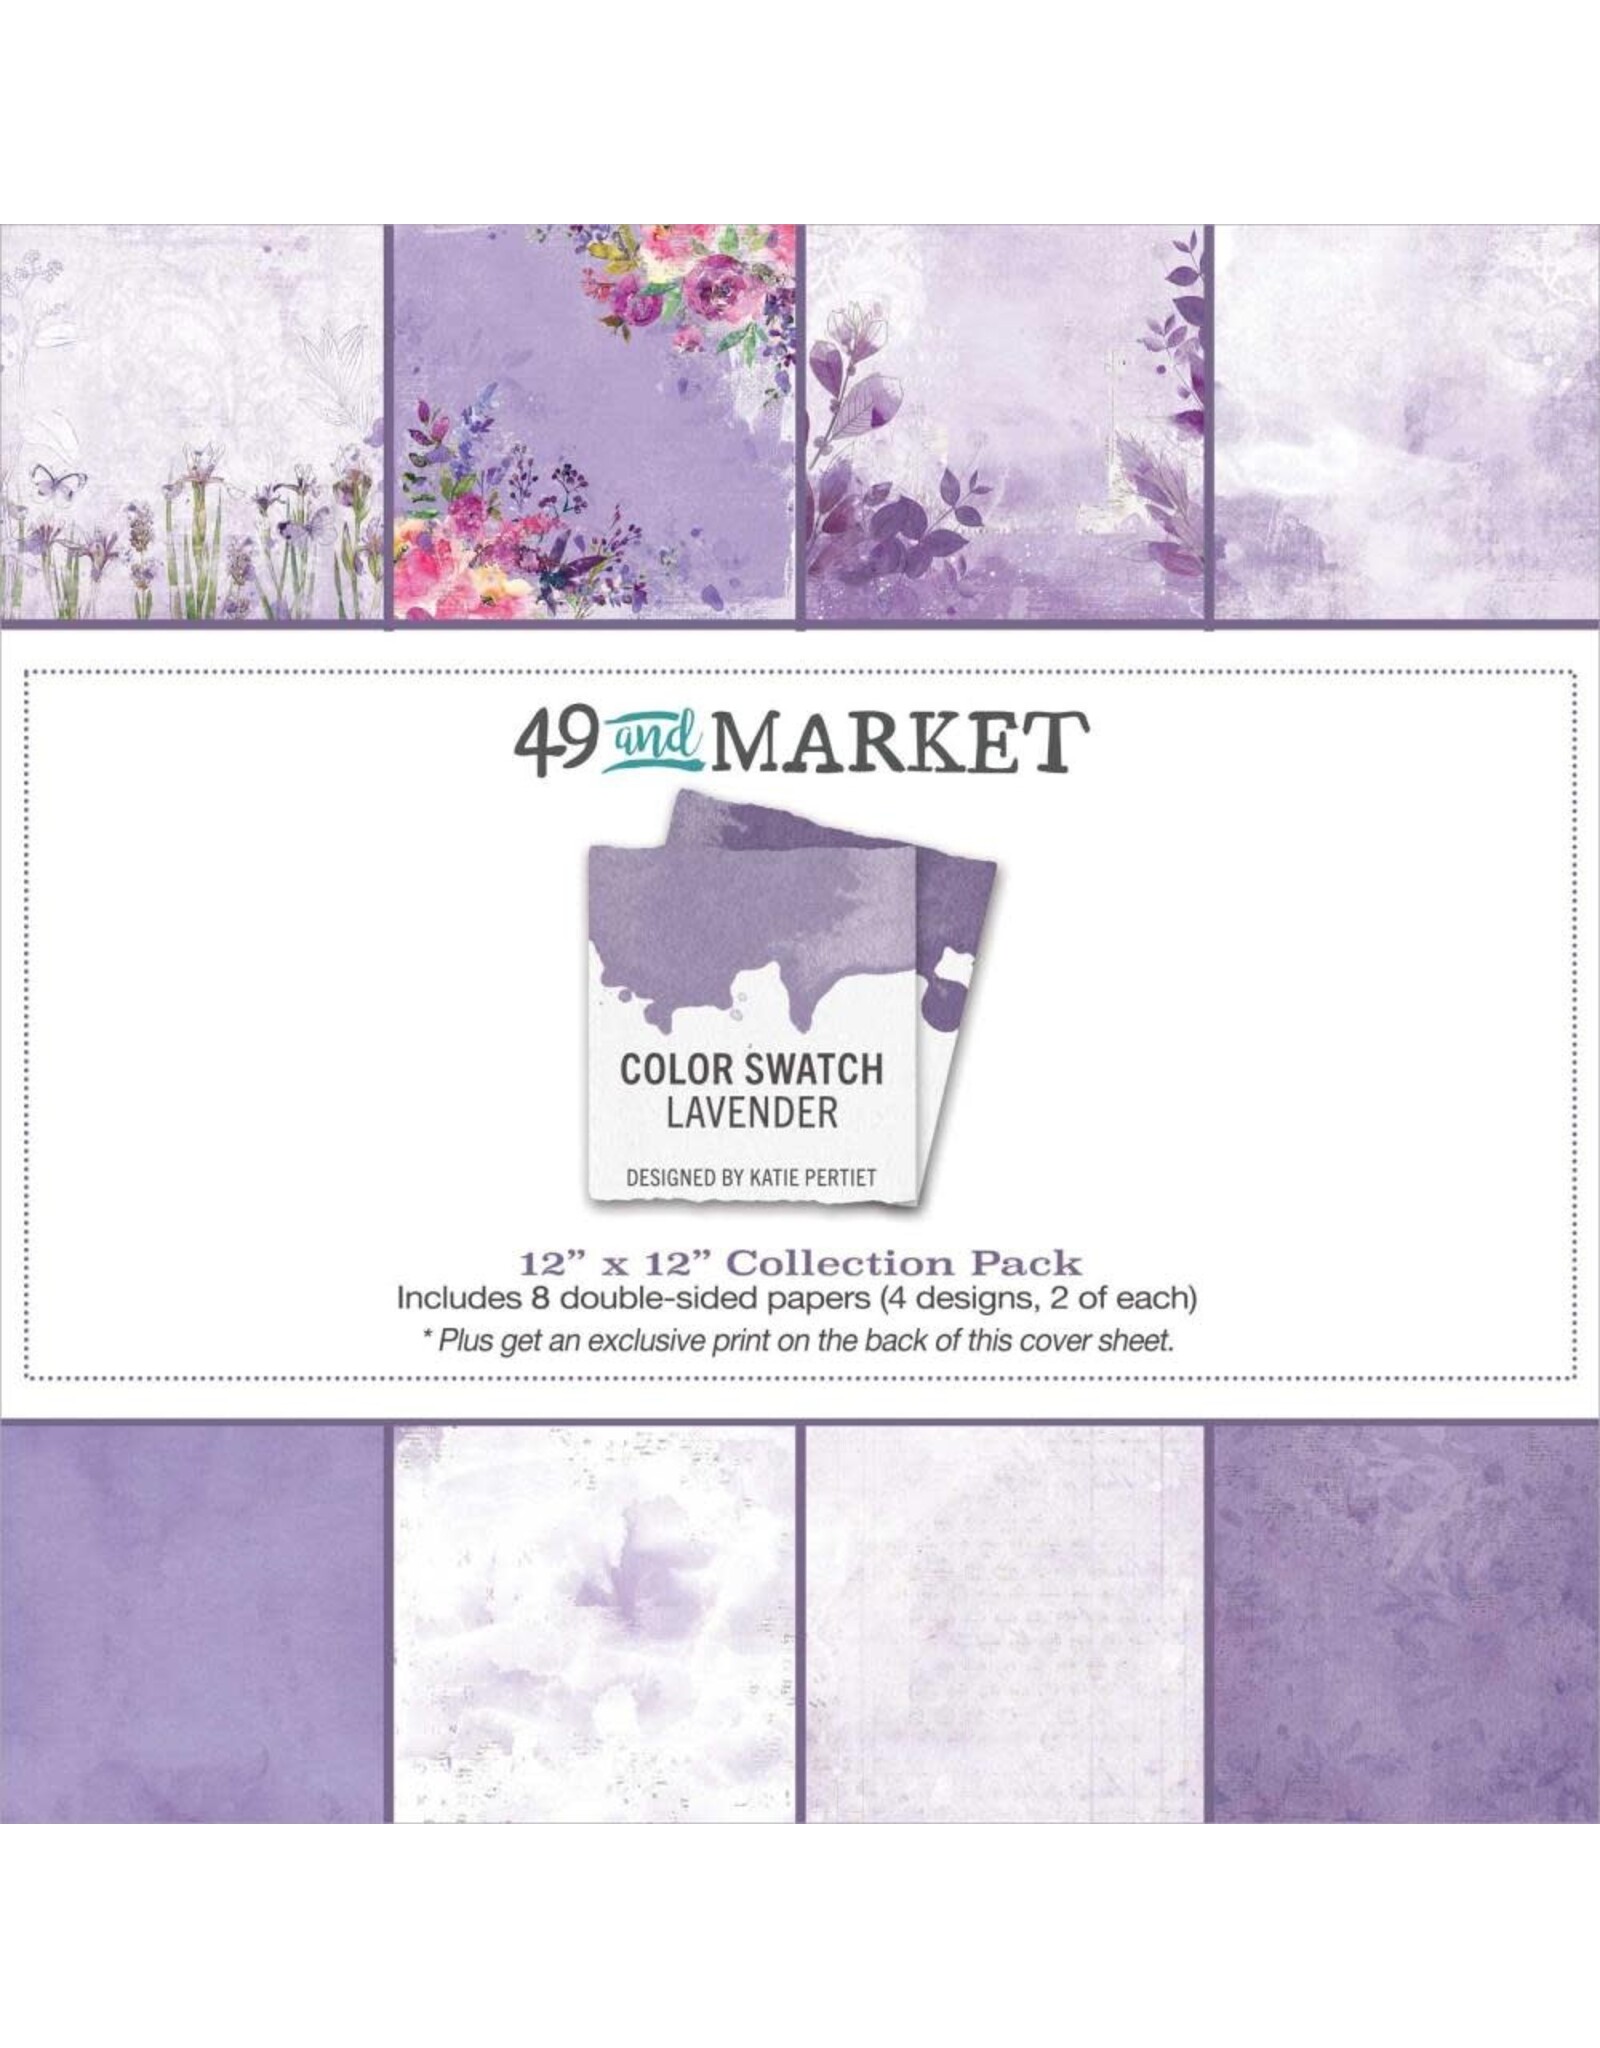 49 AND MARKET Color Swatch- Lavender 12 x12 paper pack